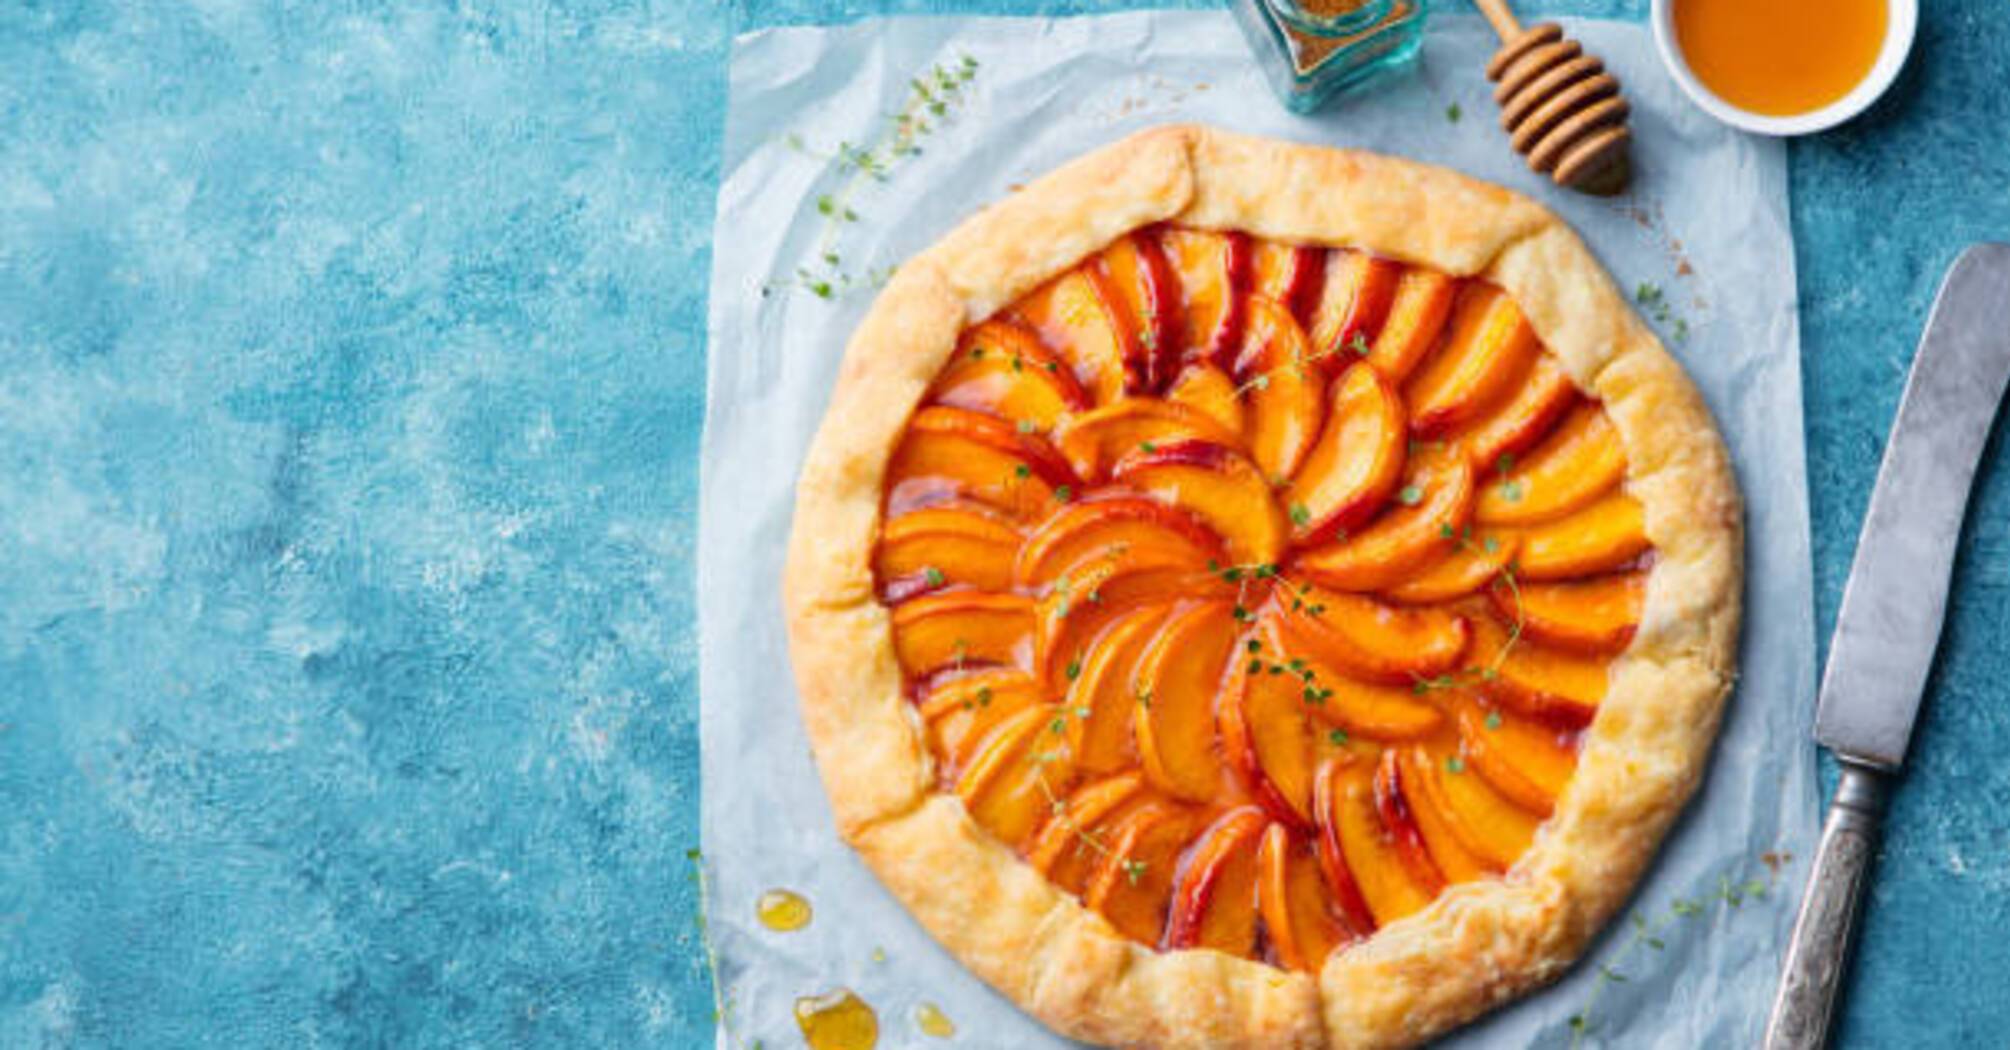 Galette with fruit